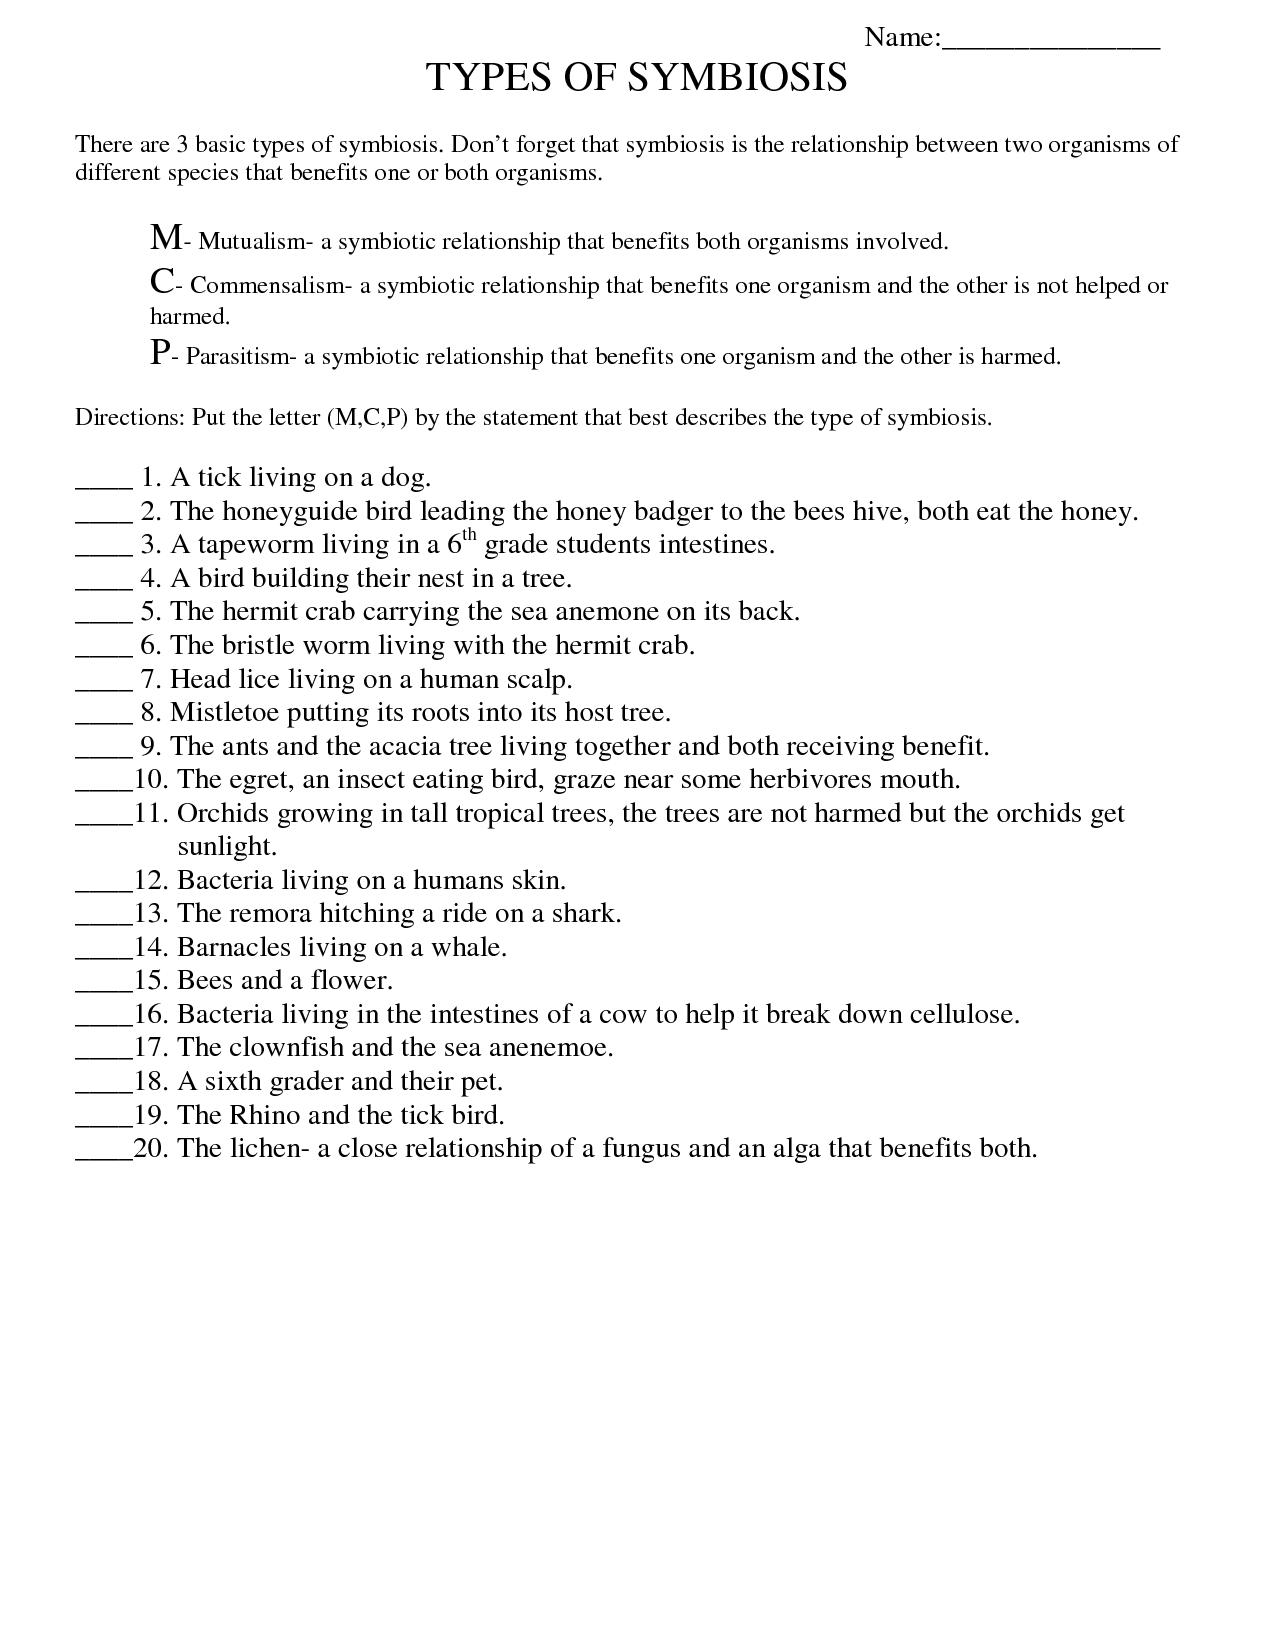 Types of Symbiosis Worksheet Answers